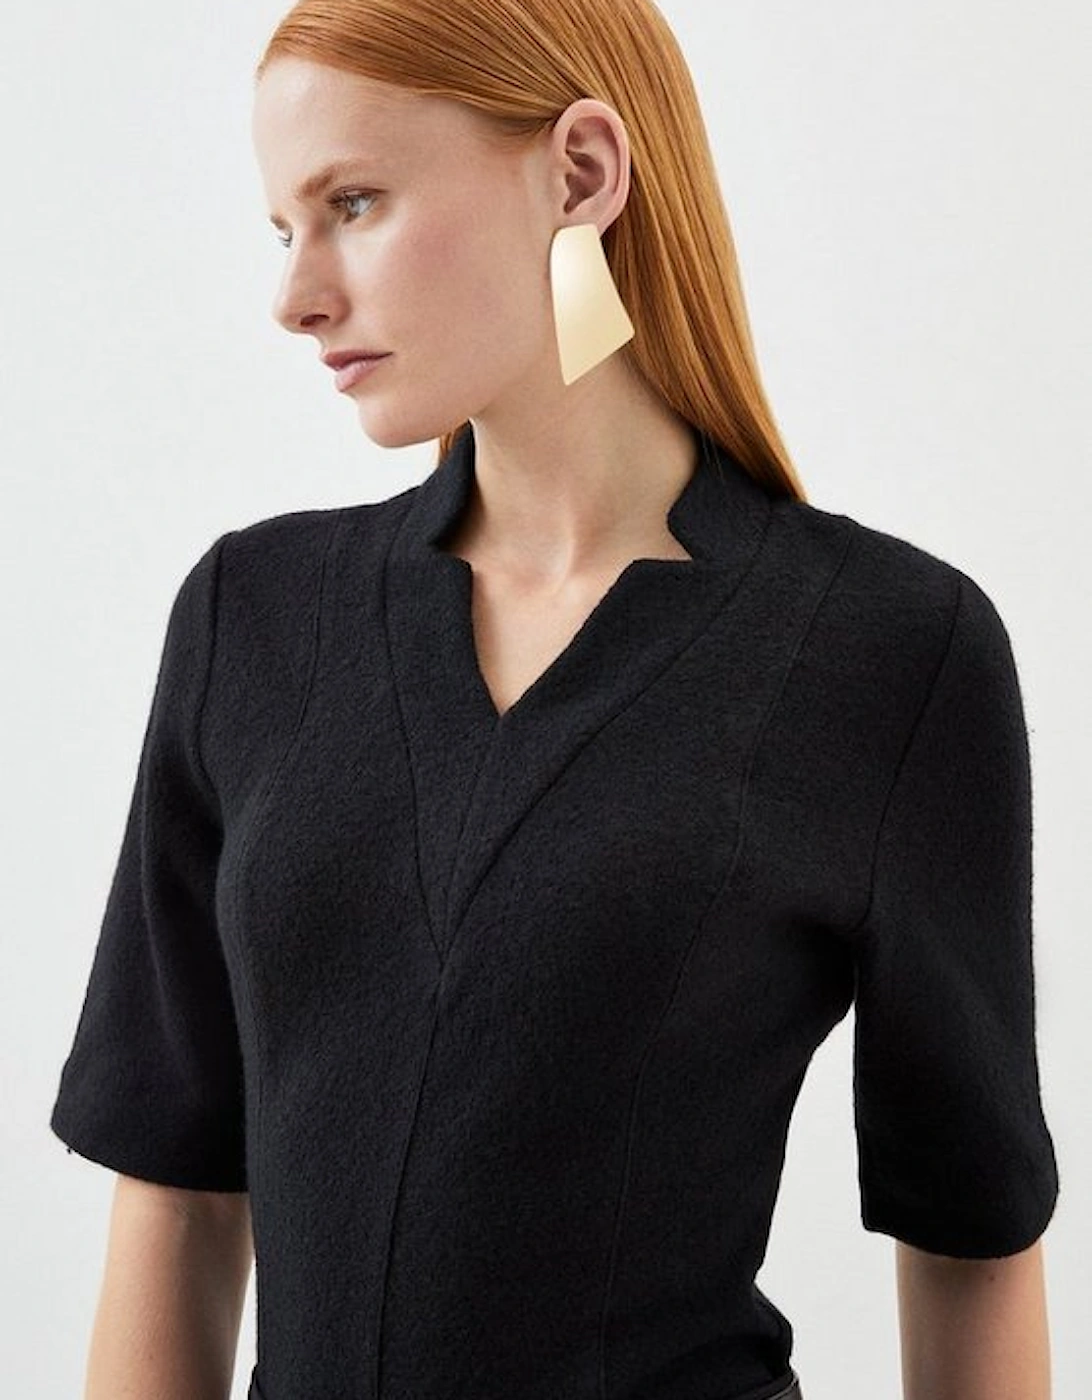 Premium 100% Washed Wool Structured Knit Top